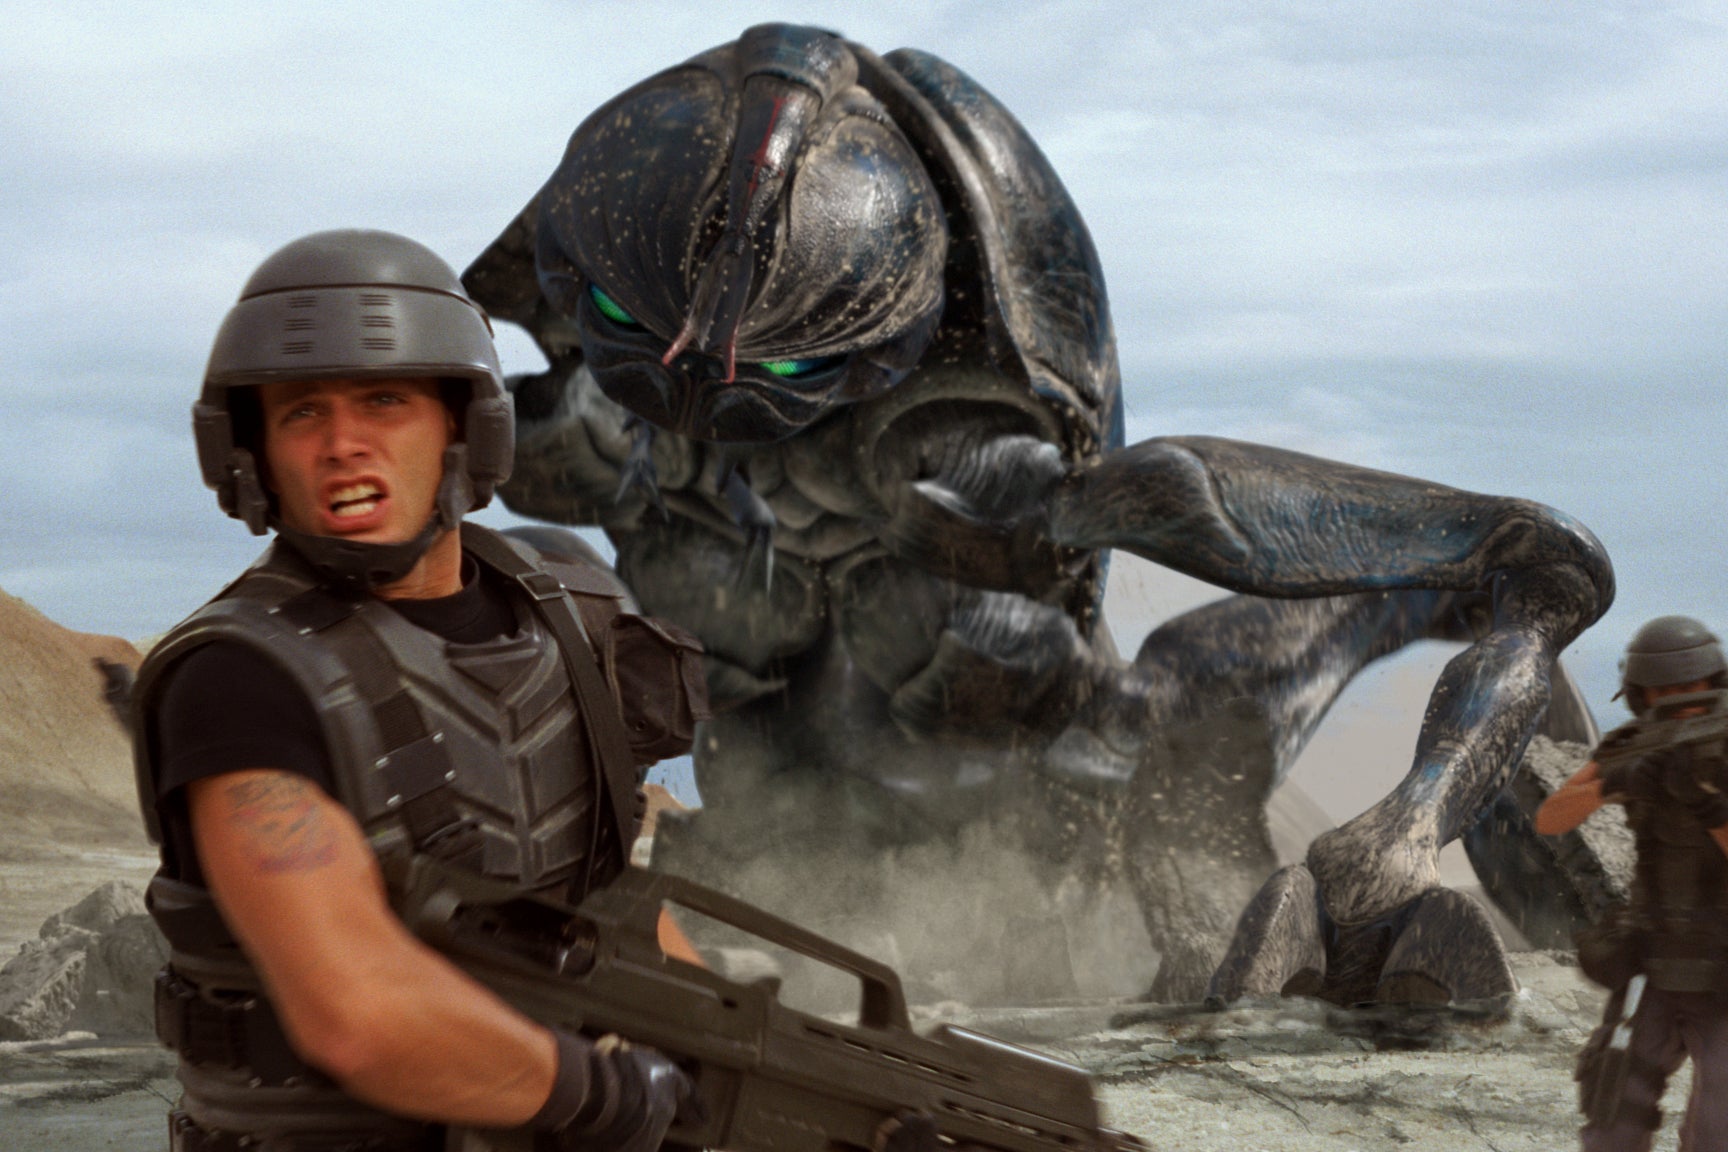 A still of Casper Van Dien in the foreground wearing tactical gear and armor, holding a gun, while running from a large alien in the background. 